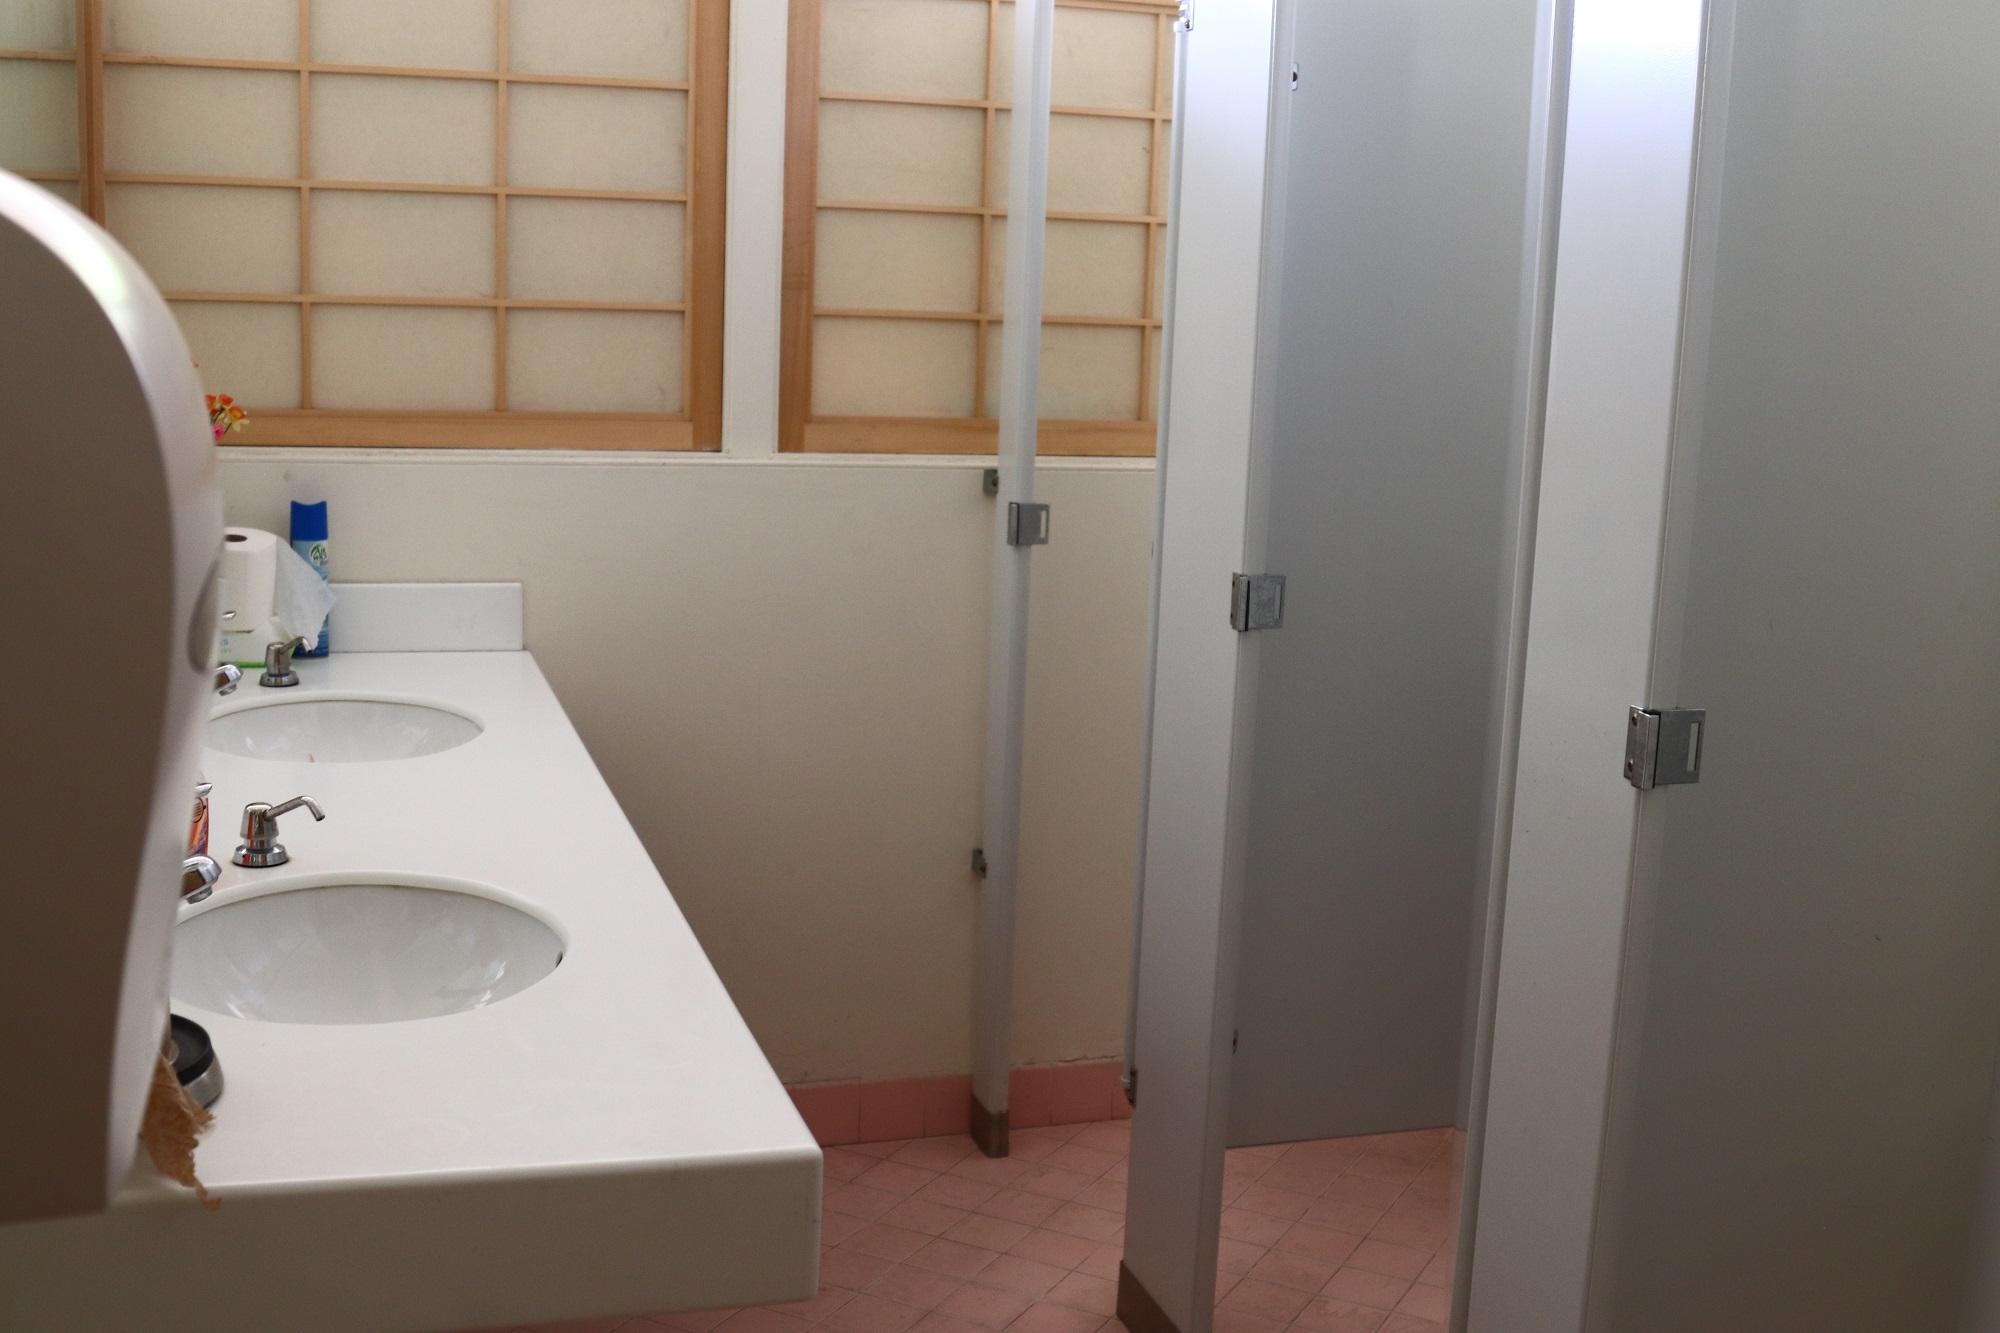 Old Restroom without space for wheelchairs and walkers